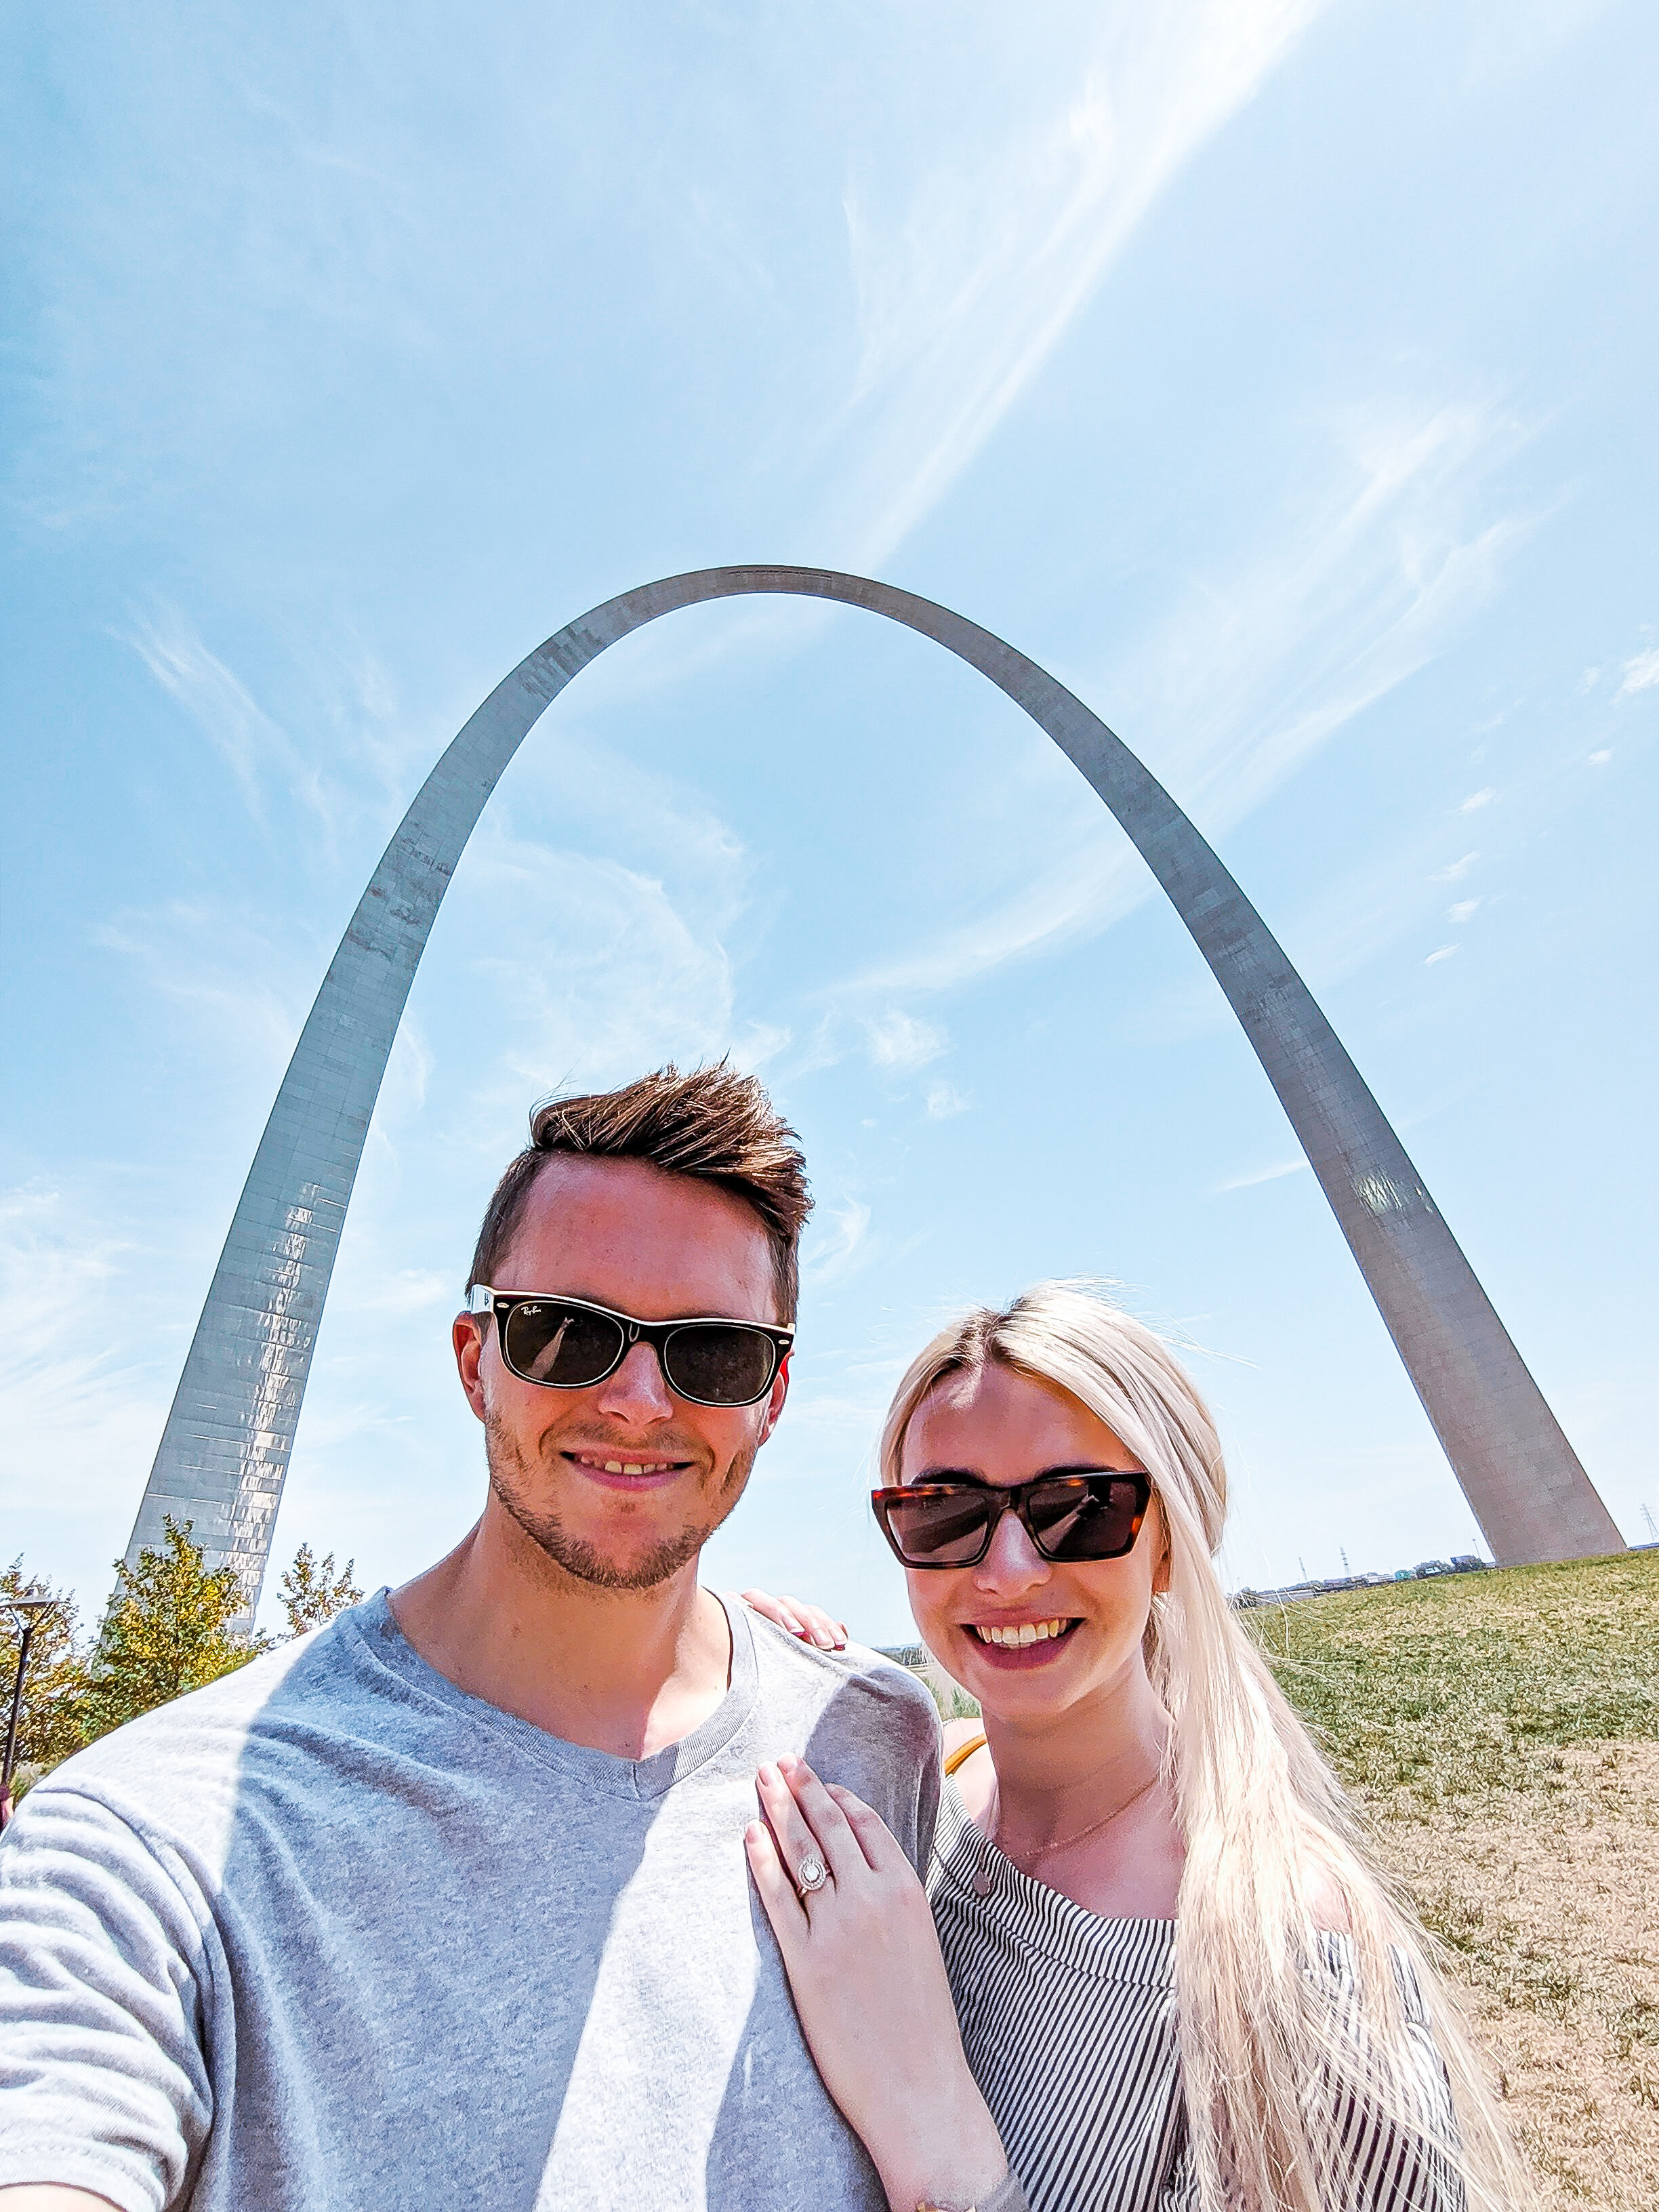 Lauren and Josiah Toews at Gateway Arch | St. Louis Weekend Travel Guide